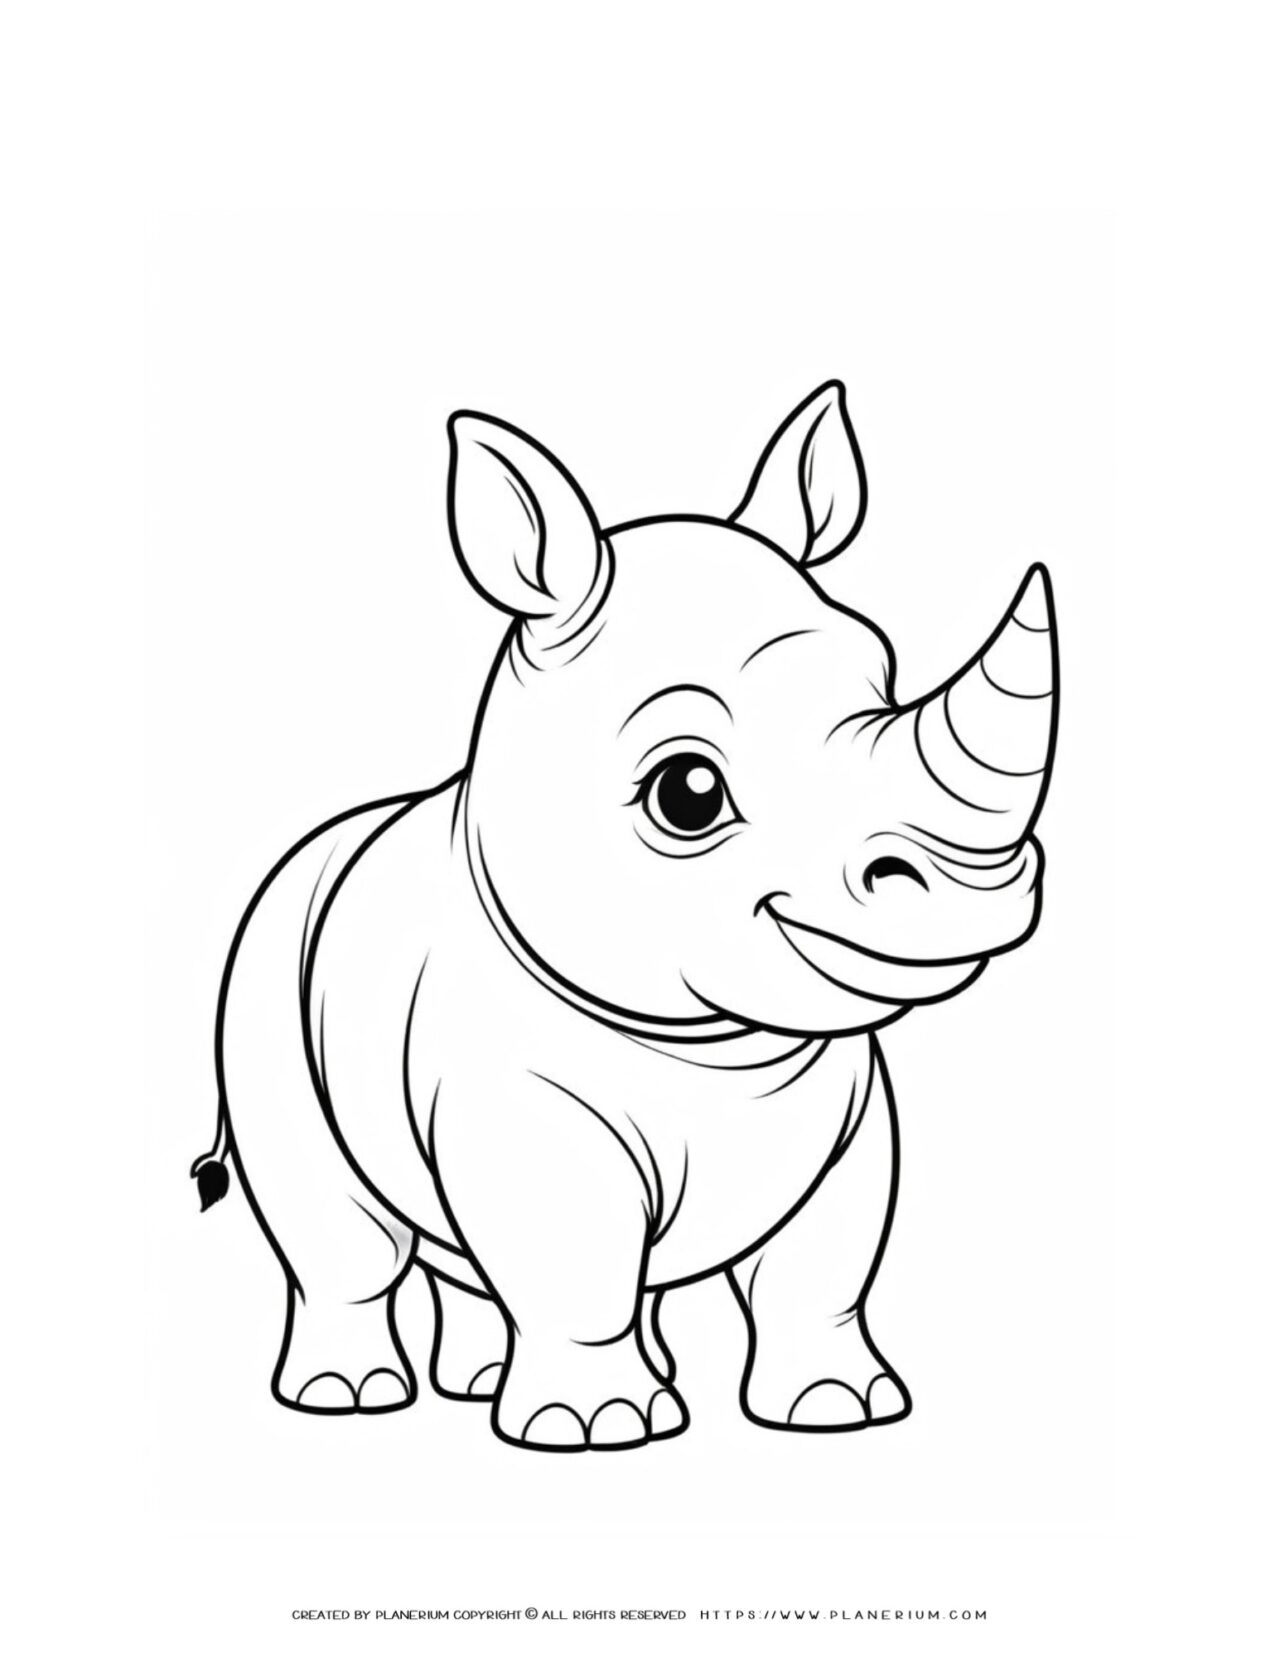 baby-rhinoceros-coloring-page-for-kids